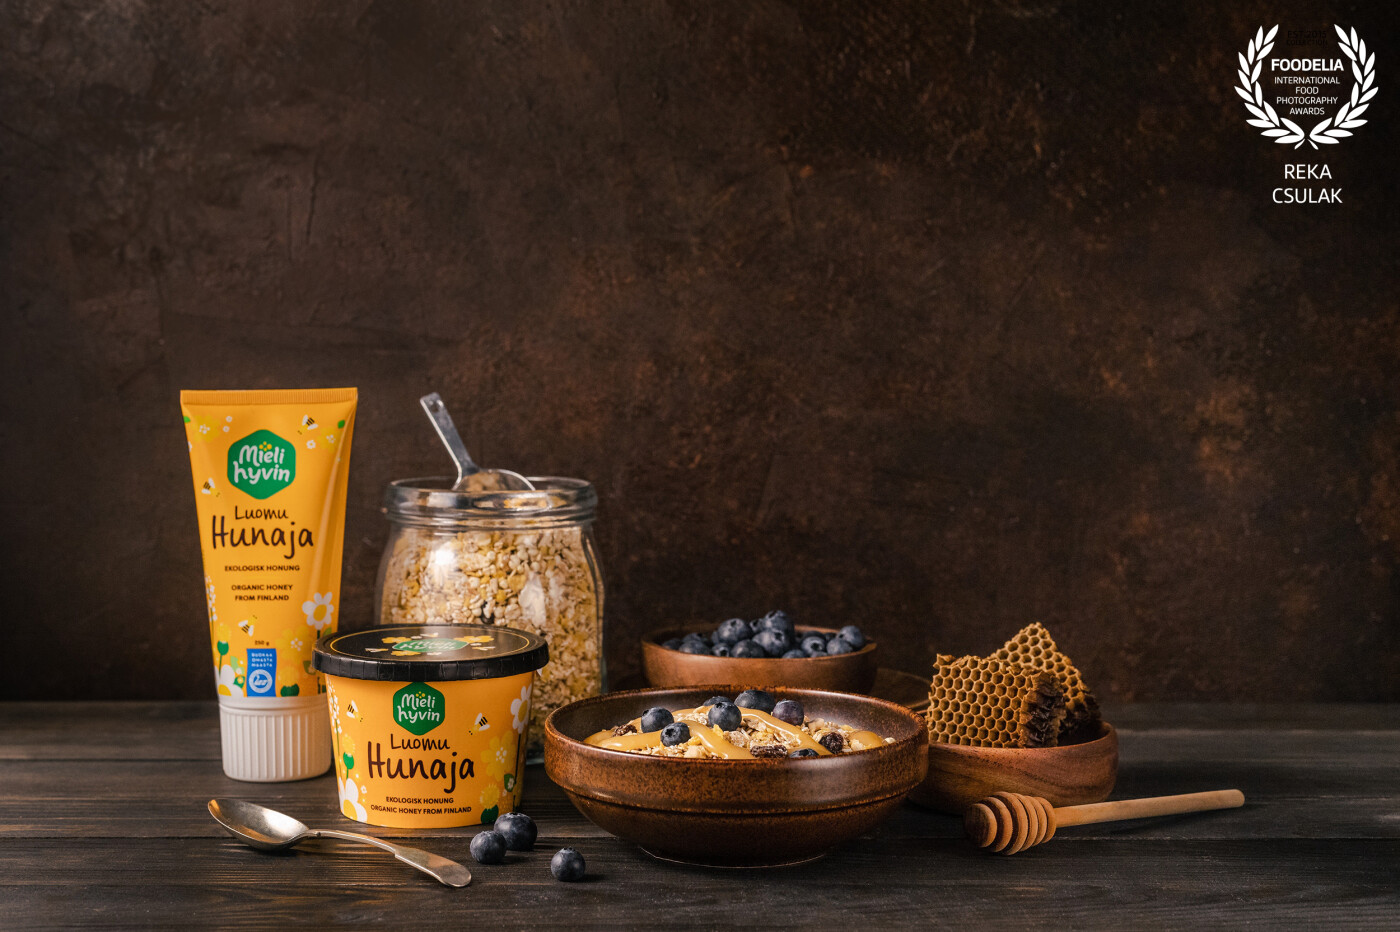 I took this photo with a breakfast scene to use it as a cover image of the organic Finnish honey brand's refreshed website, featuring the updated packaging of their products.